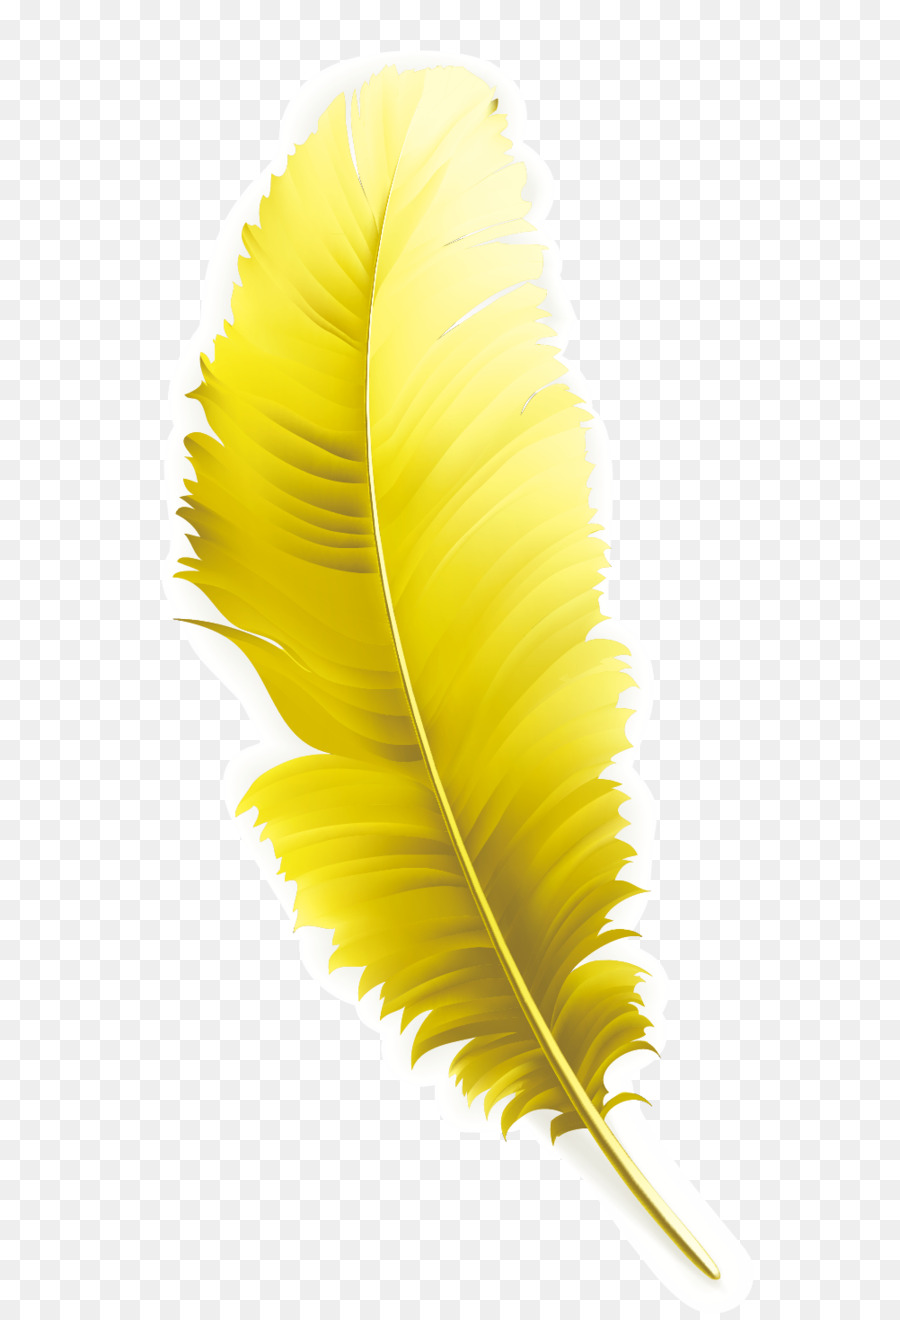 Feather Yellow Computer file - Yellow feathers png download - 1002*1467 - Free Transparent Feather png Download.